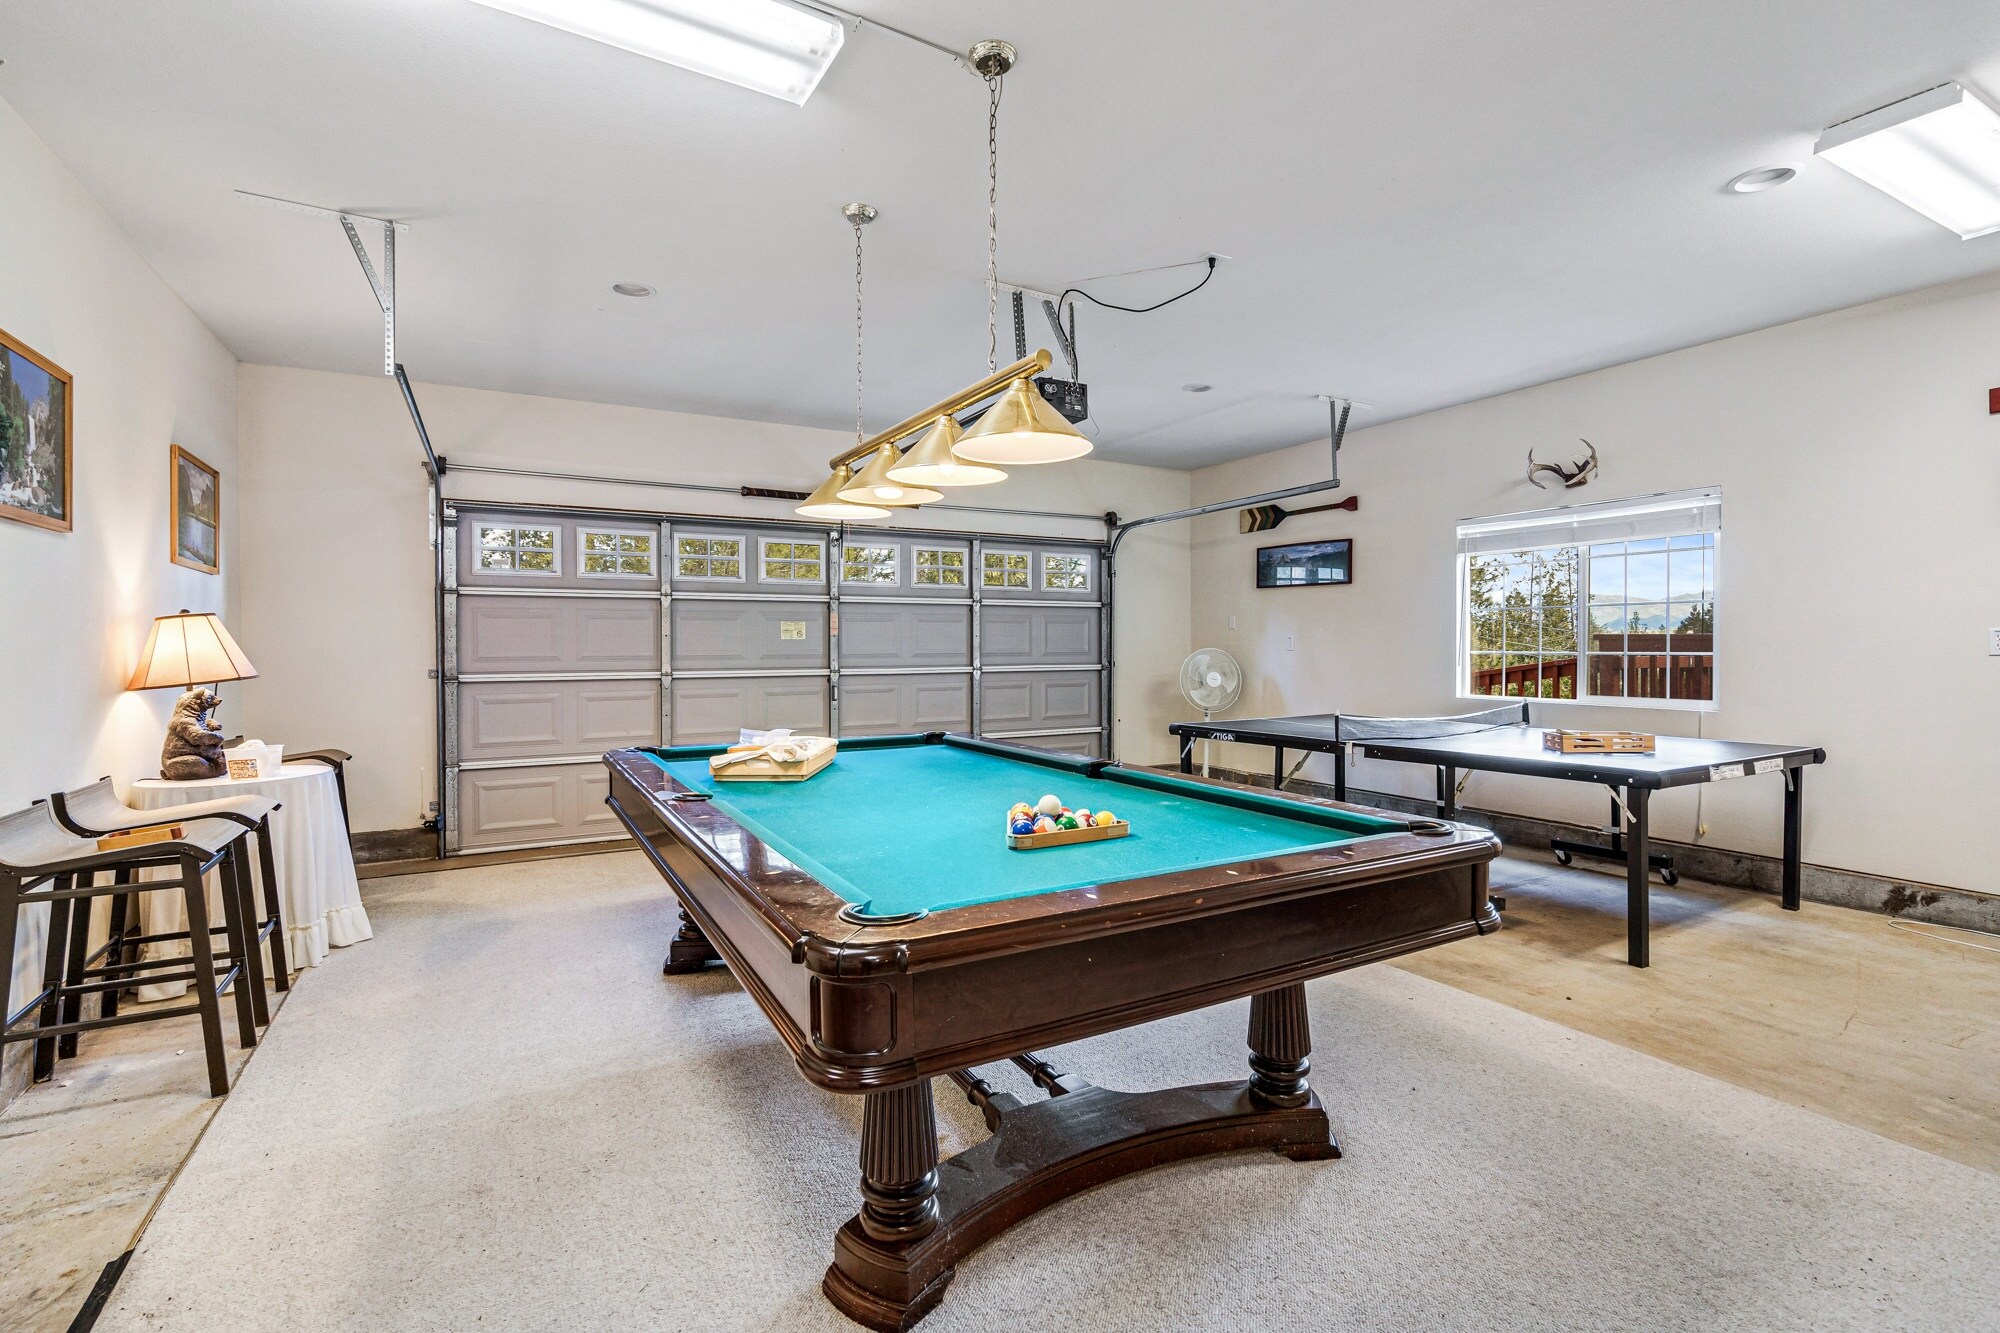 Game room in garage. Pine Mountain Lake Vacation Rental "Star of the Mountain" - Unit 13 Lot 142.